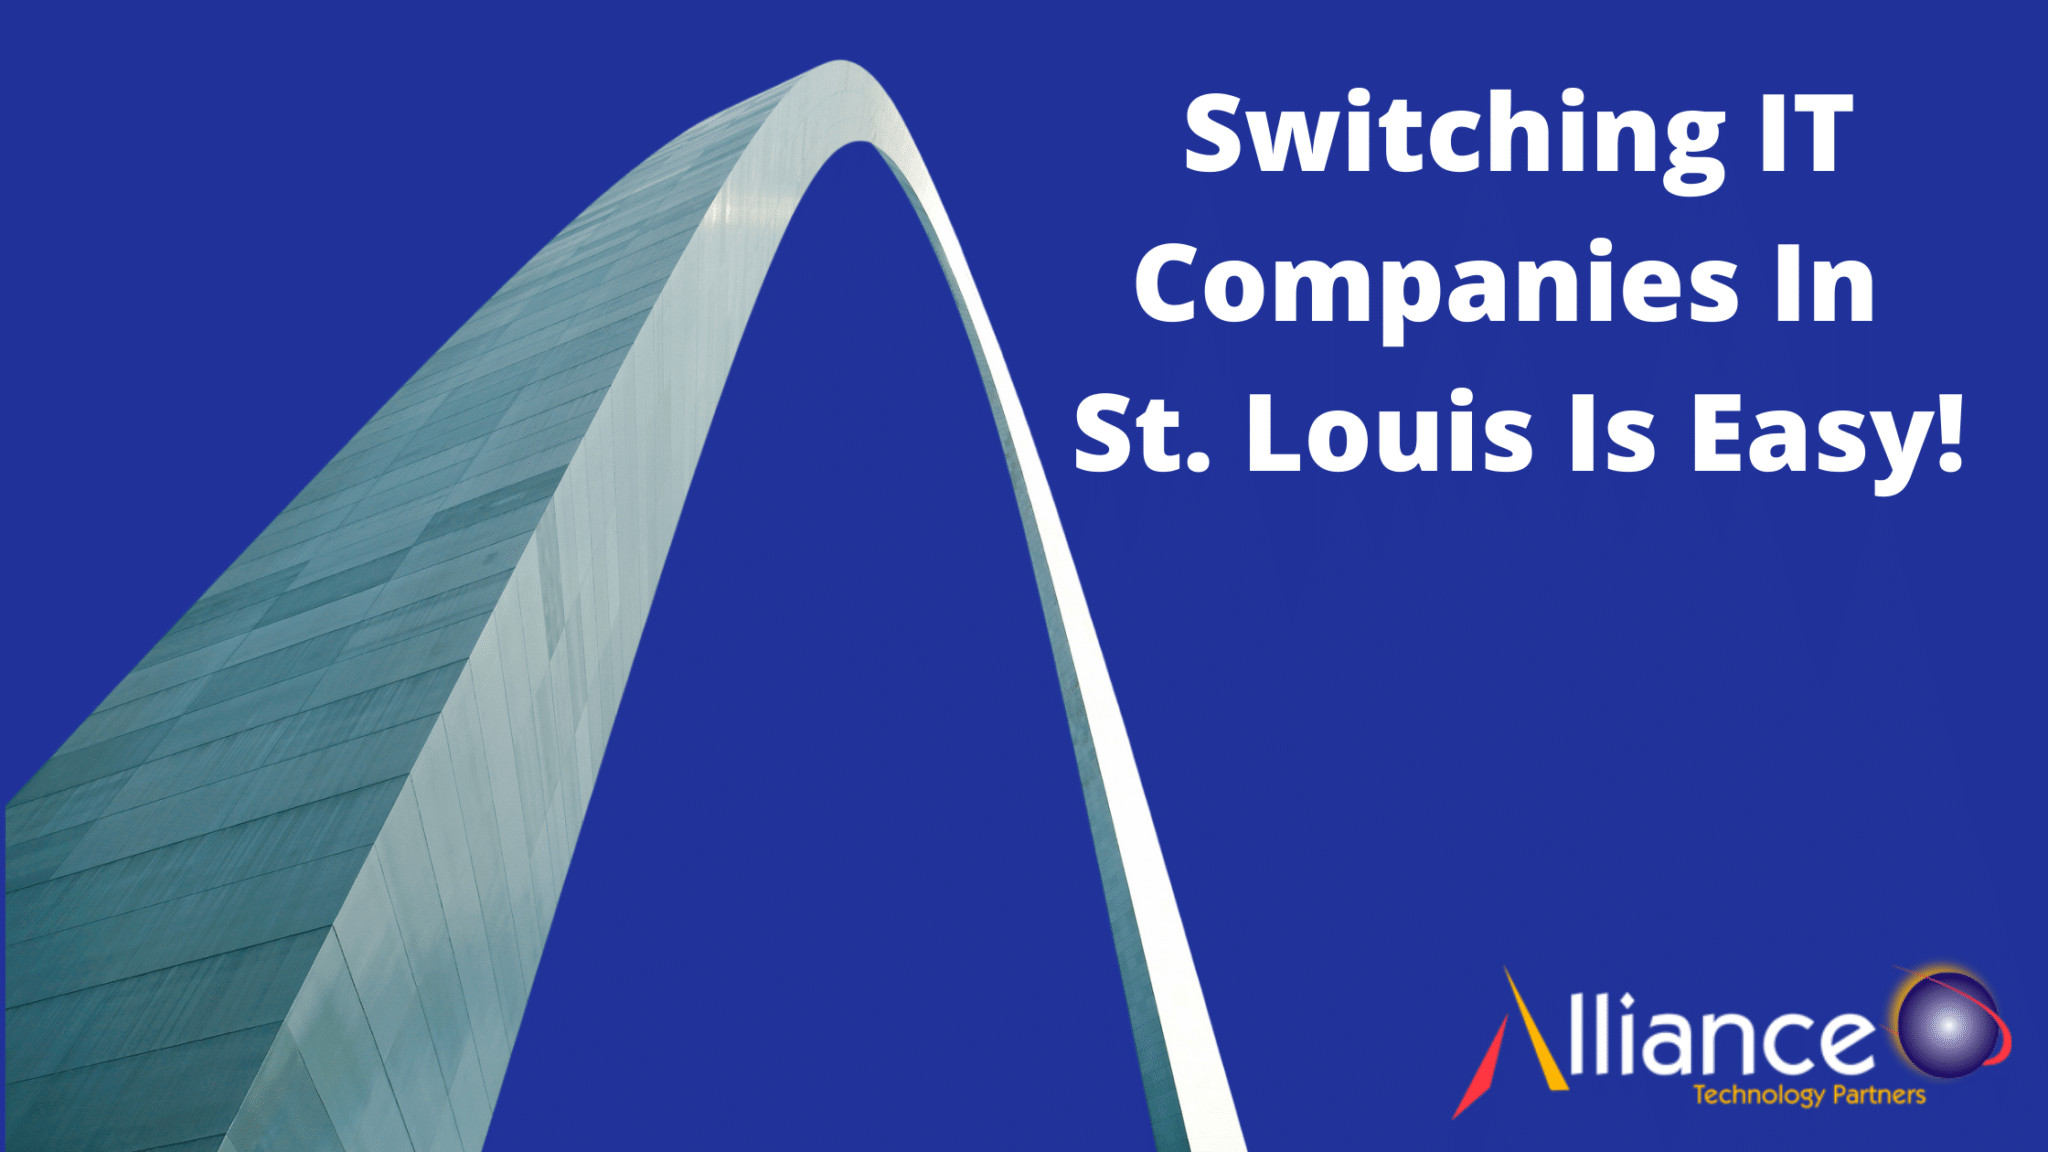 Switching IT Companies In St. Louis Is Easy!